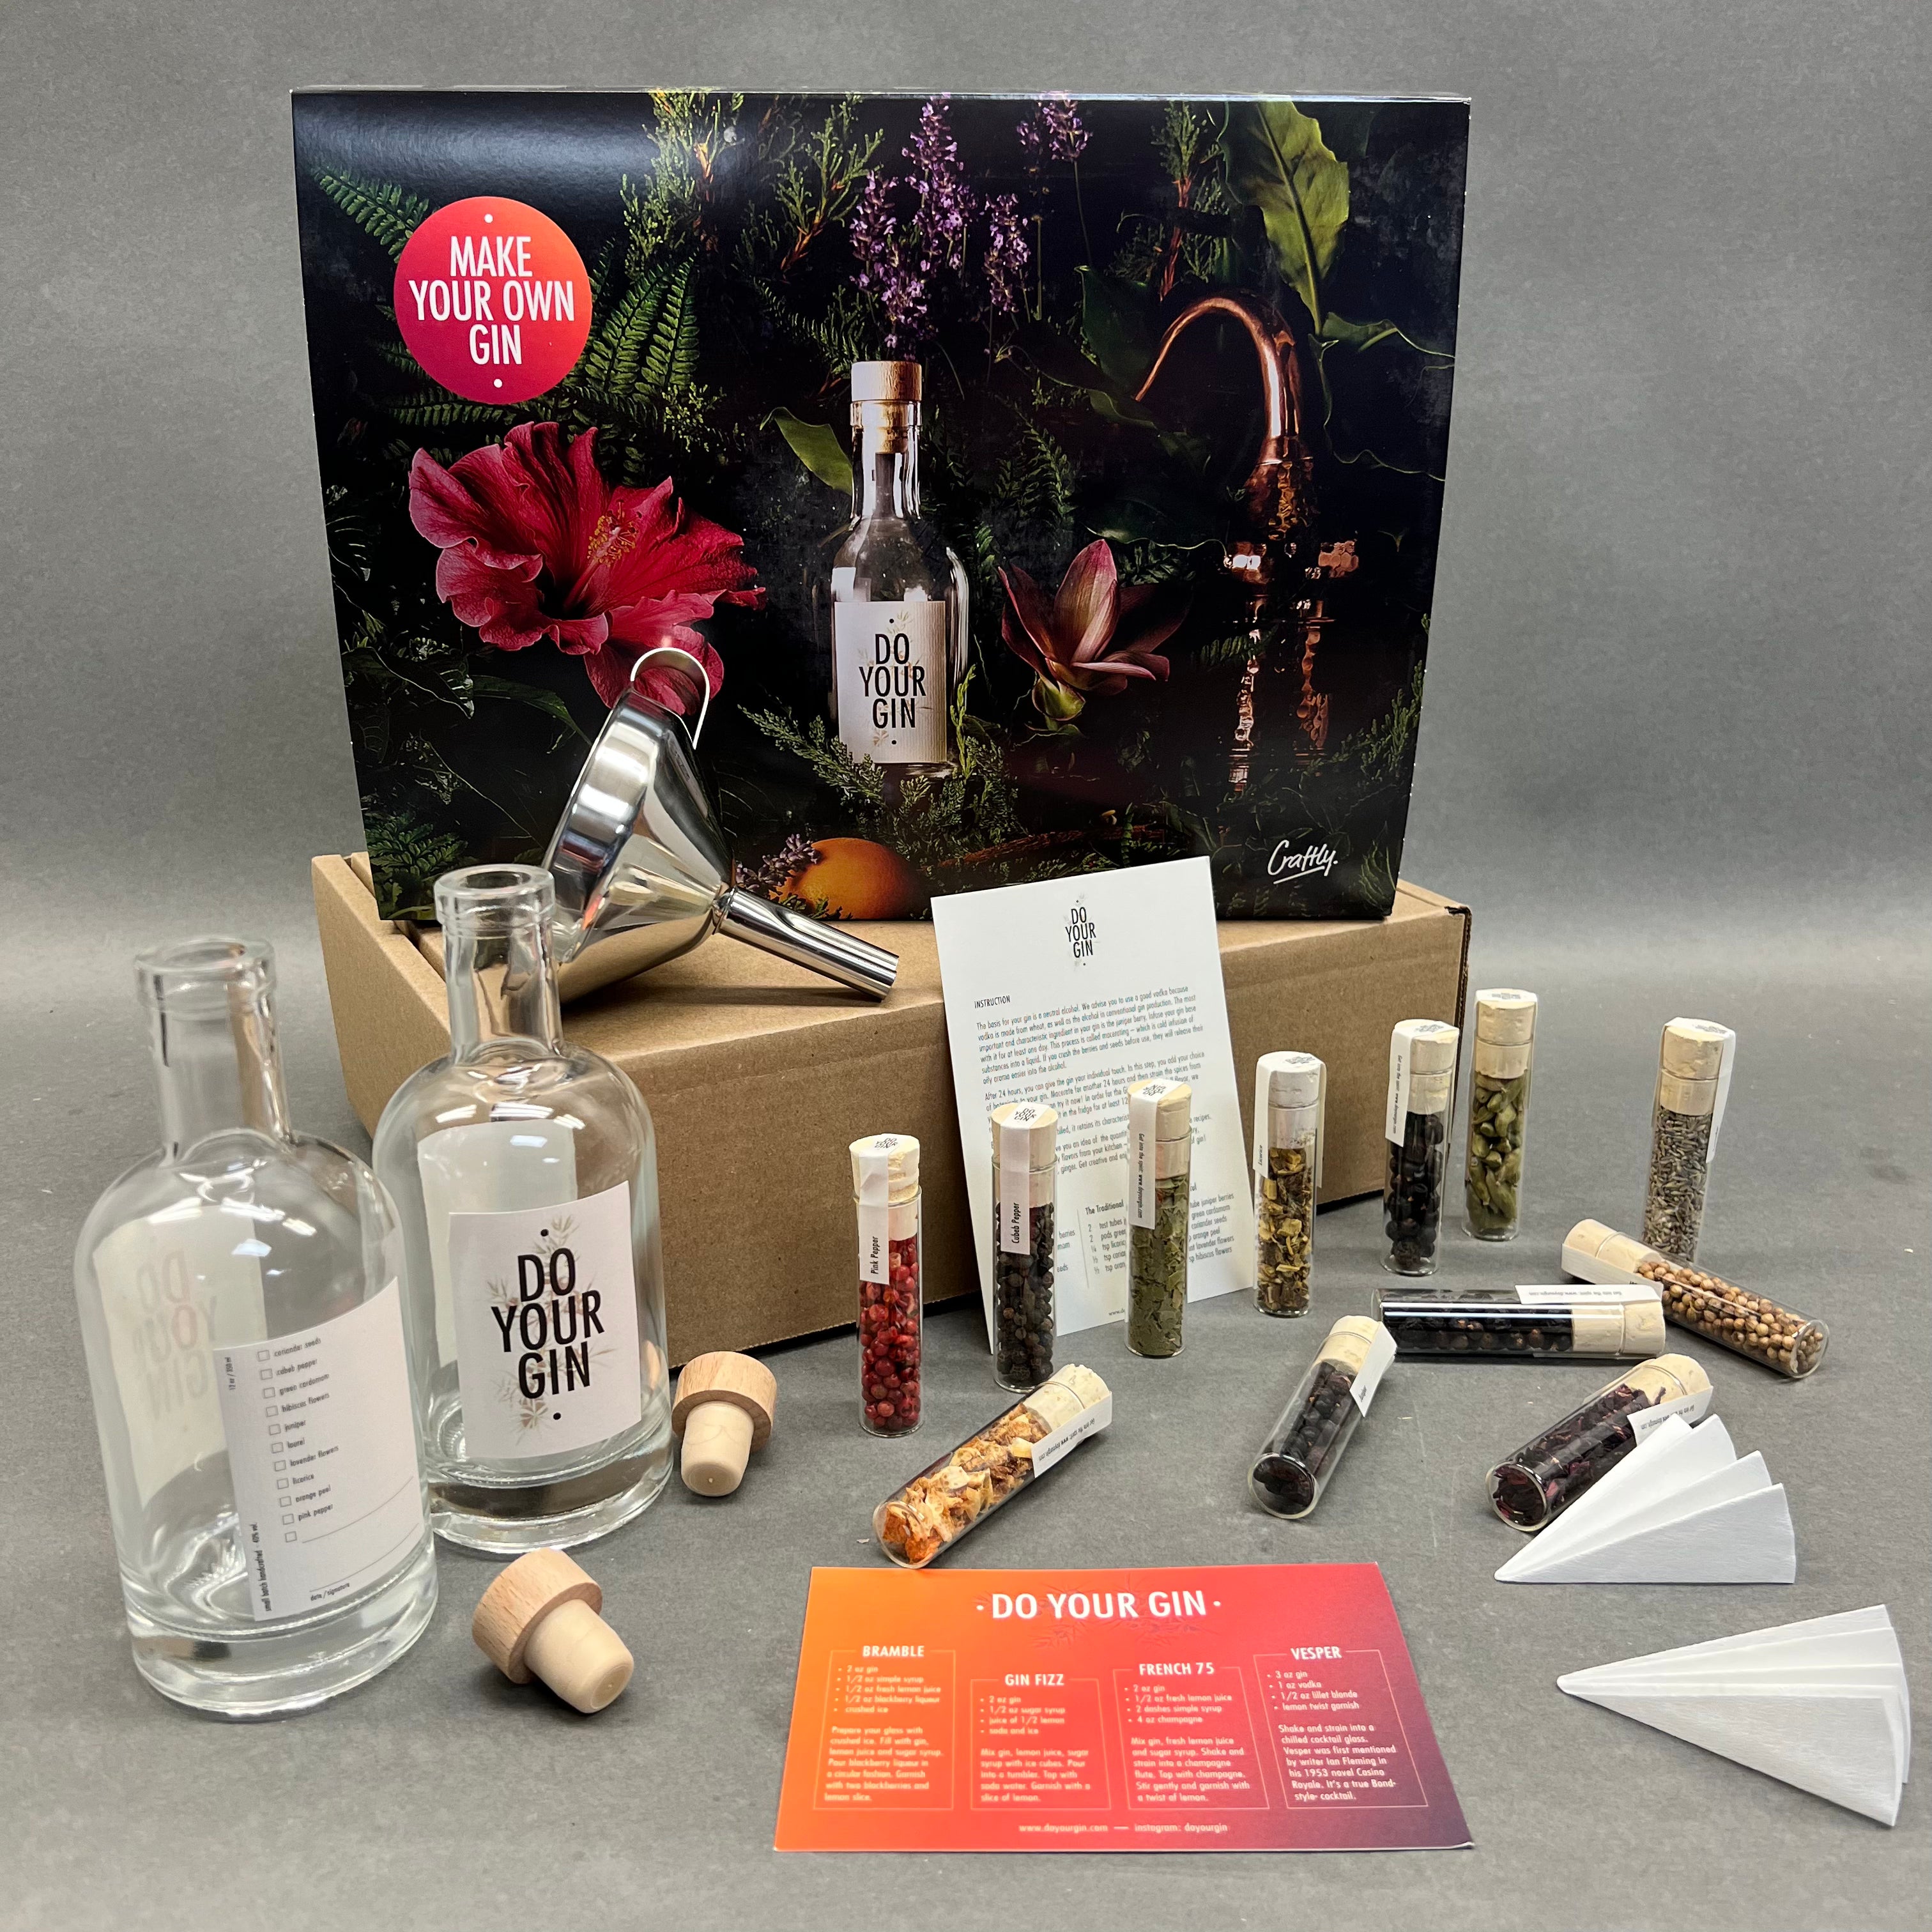 A new Gin-eration of DIY. We bring you the first of its kind in India, The  Gin Explorers Club Gin Infusion Kit! You can now turn a classic Gin into